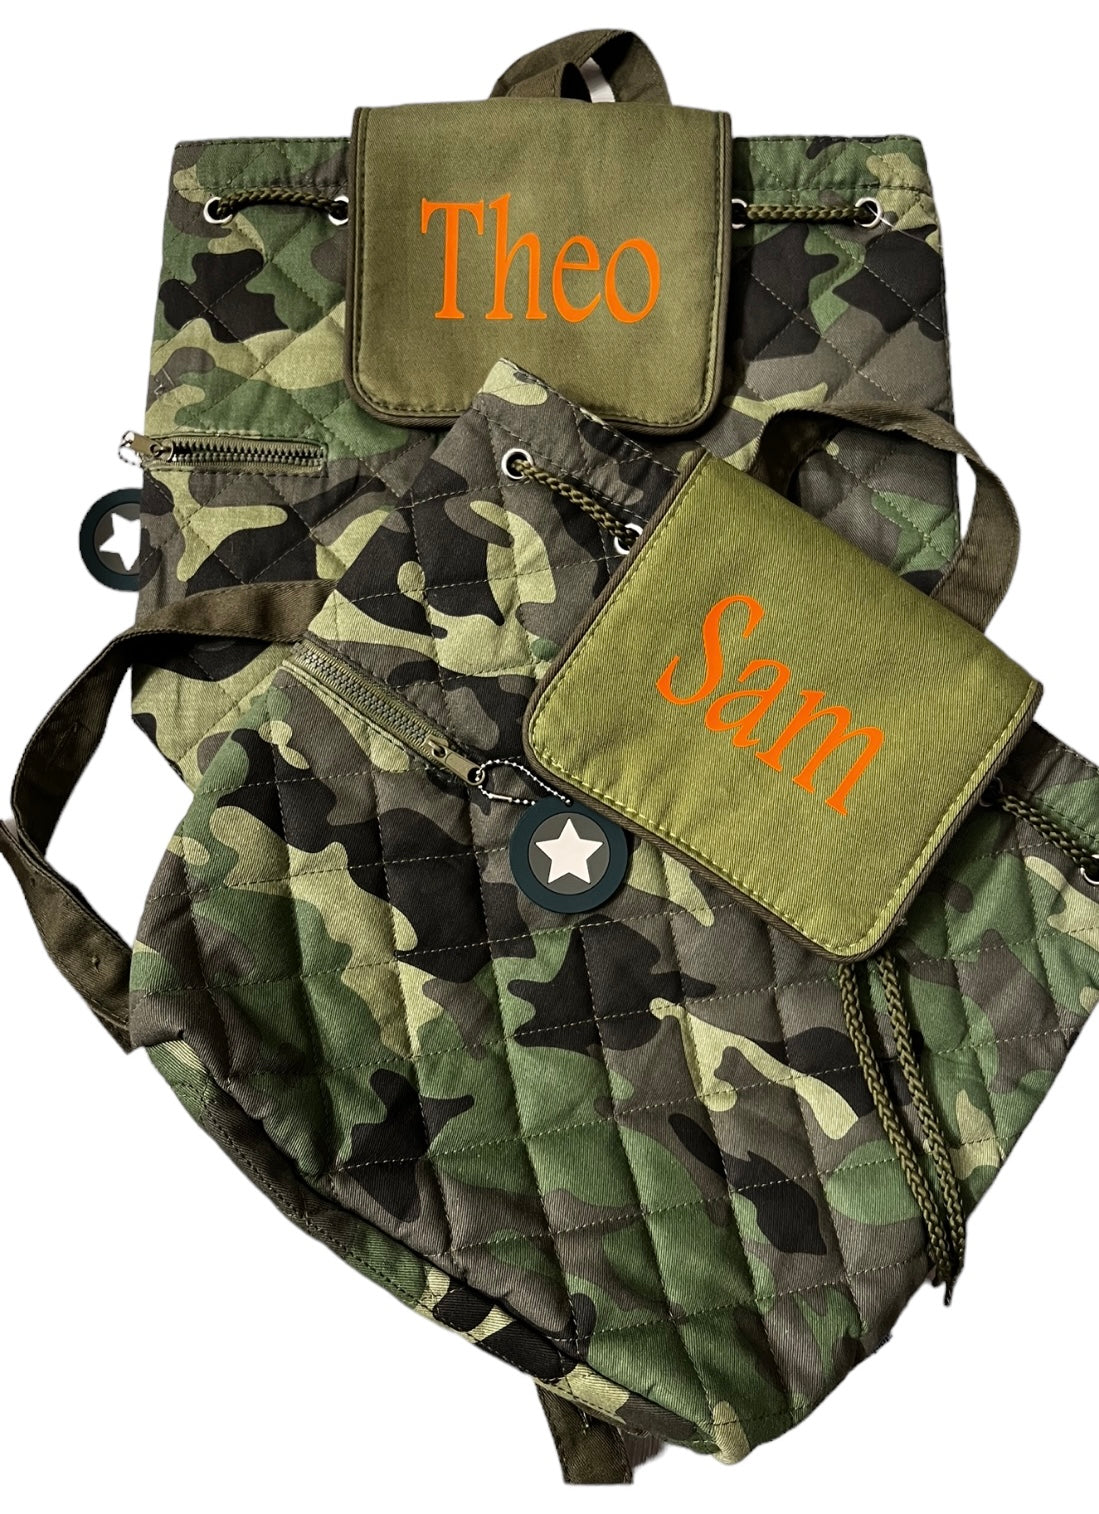 Personalized Quilted Backpack - Camo